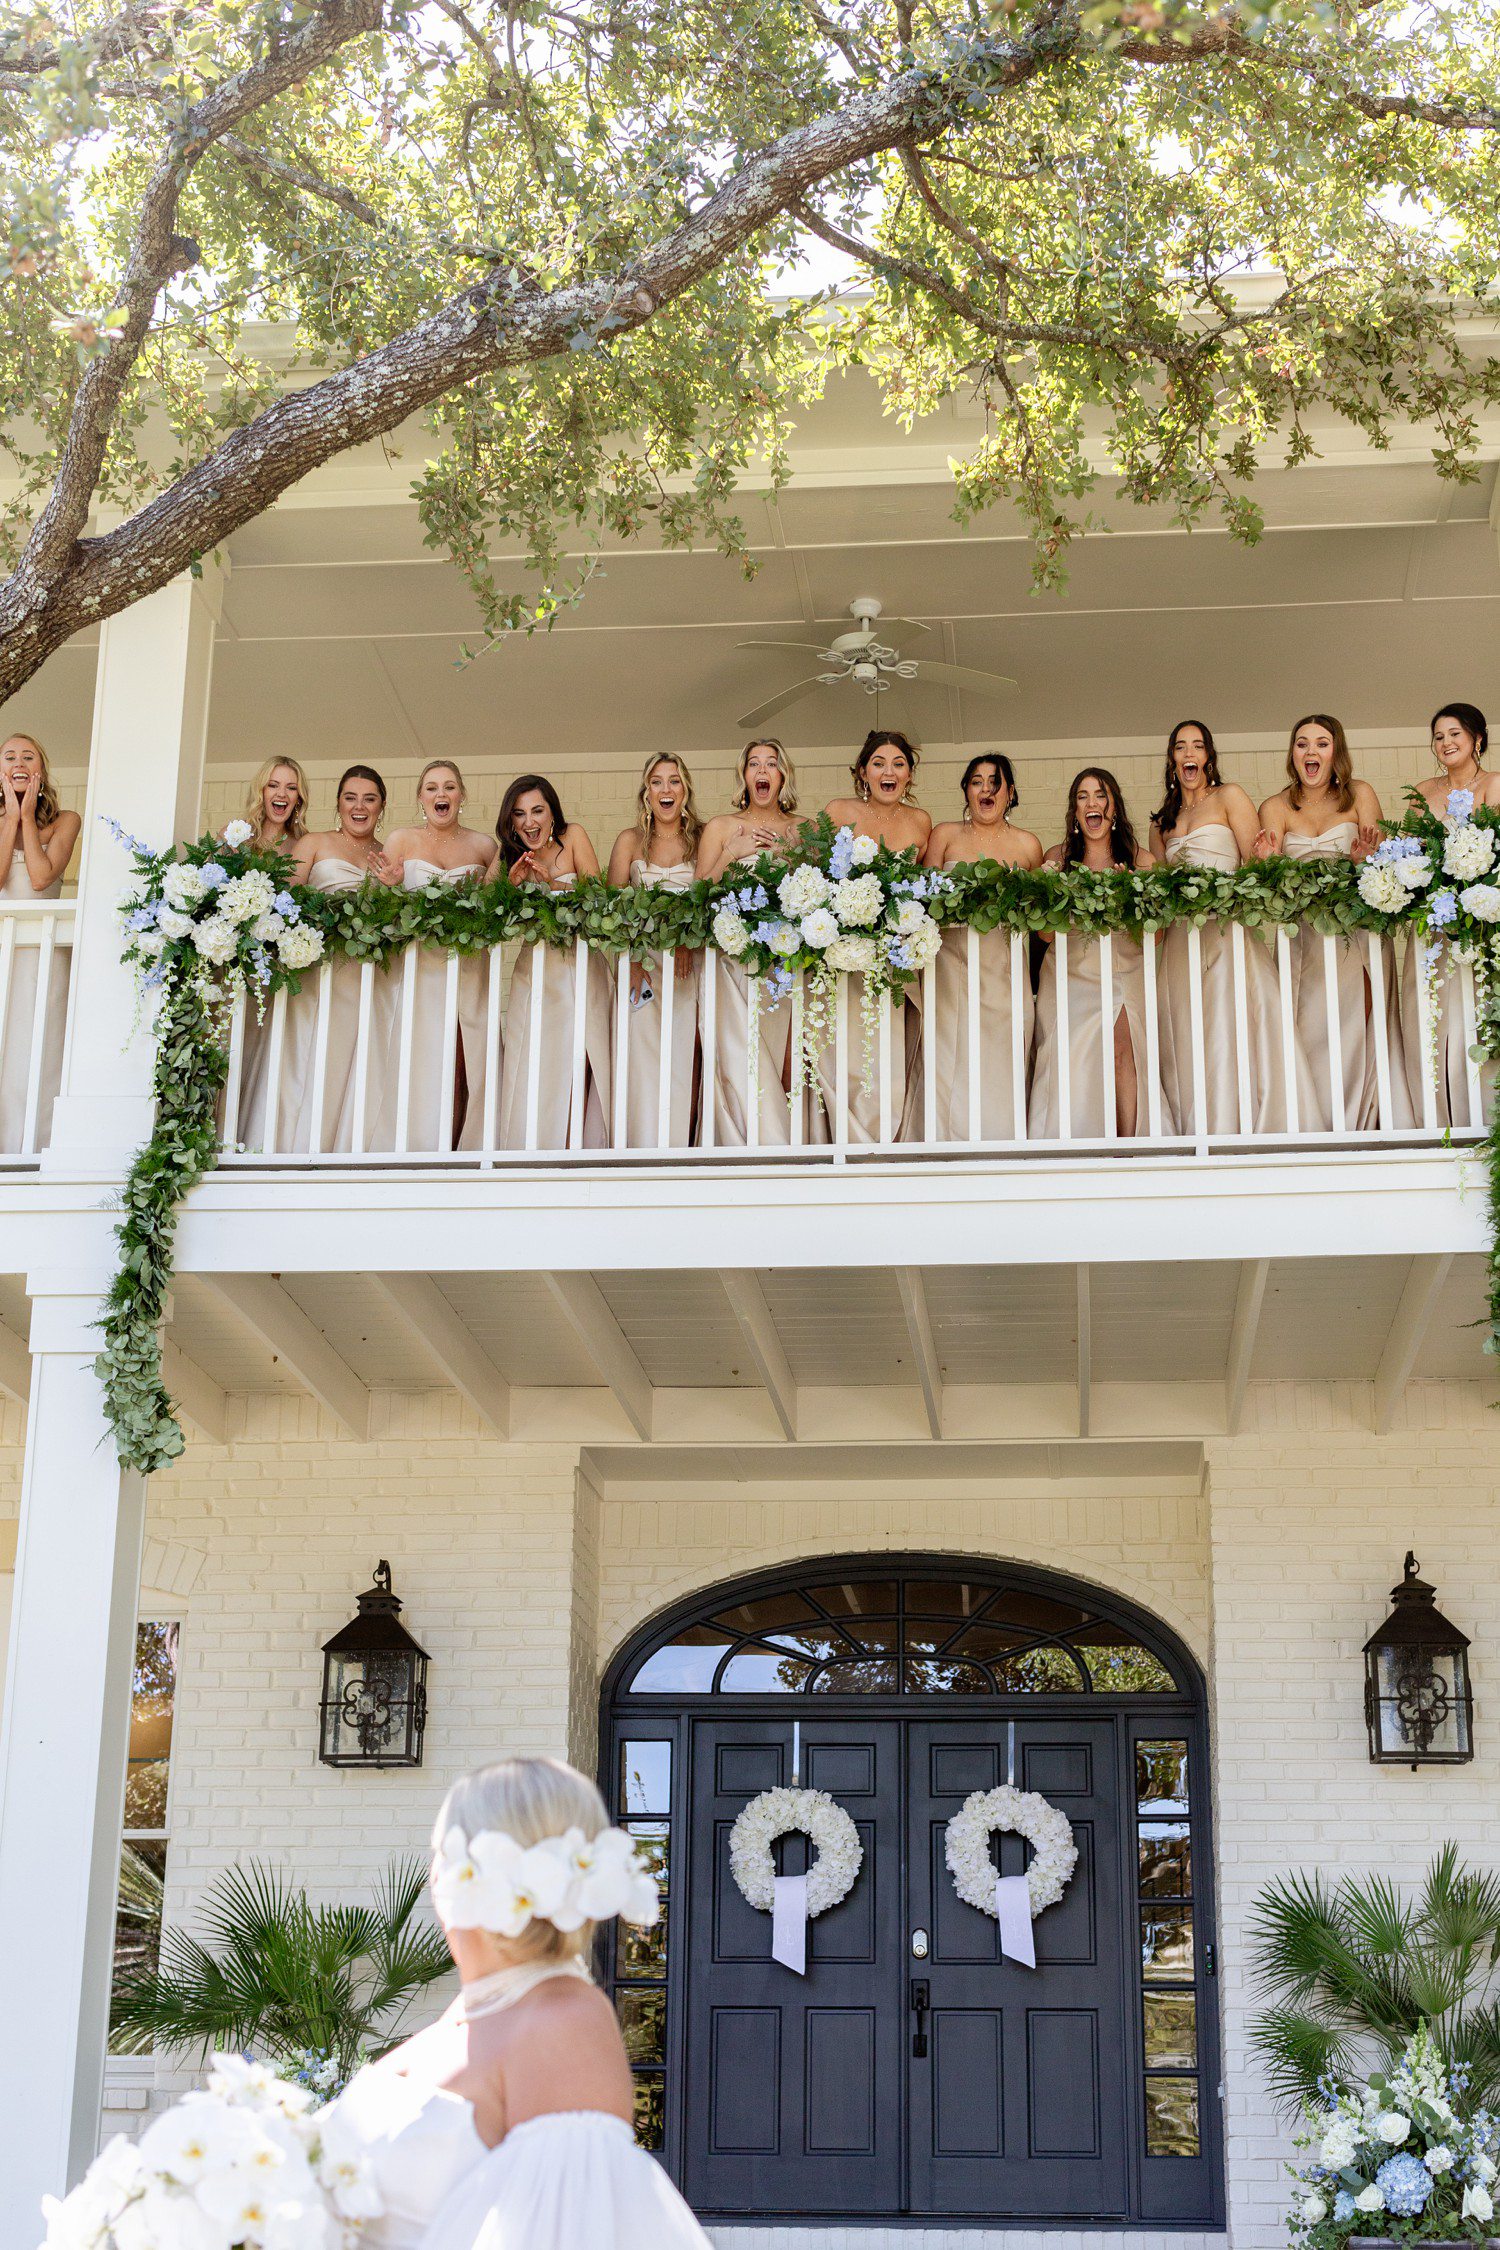 Bridesmaid reveal on porch of house.